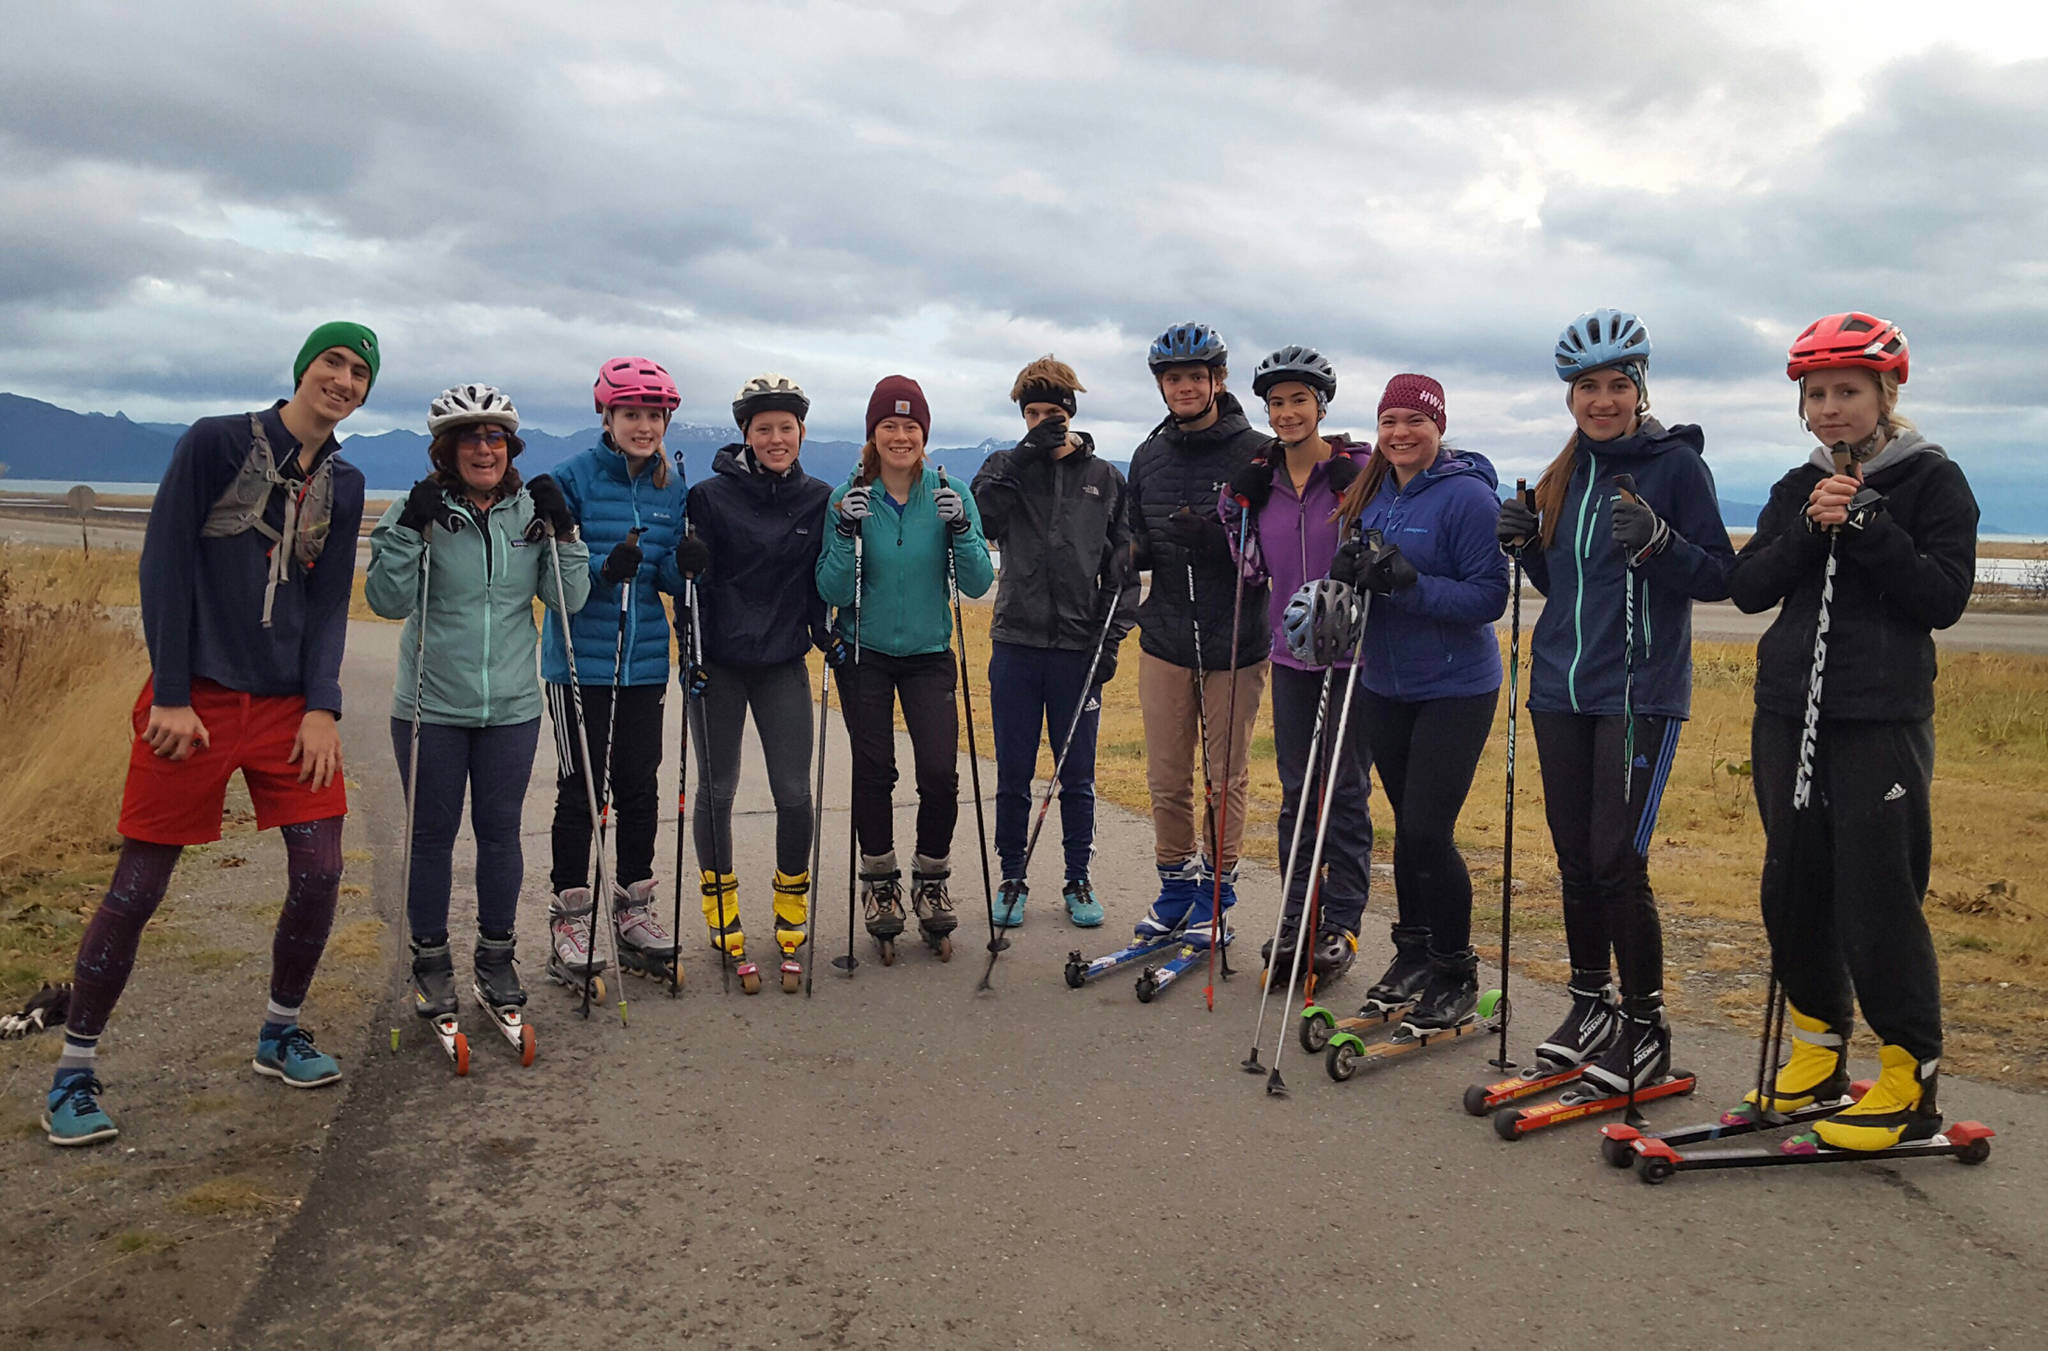 Members of the Homer High School cross-country ski team pose while practicing on roller skis on the Homer Spit in Homer, Alaska. (Photo courtesy Alison O’Hara)